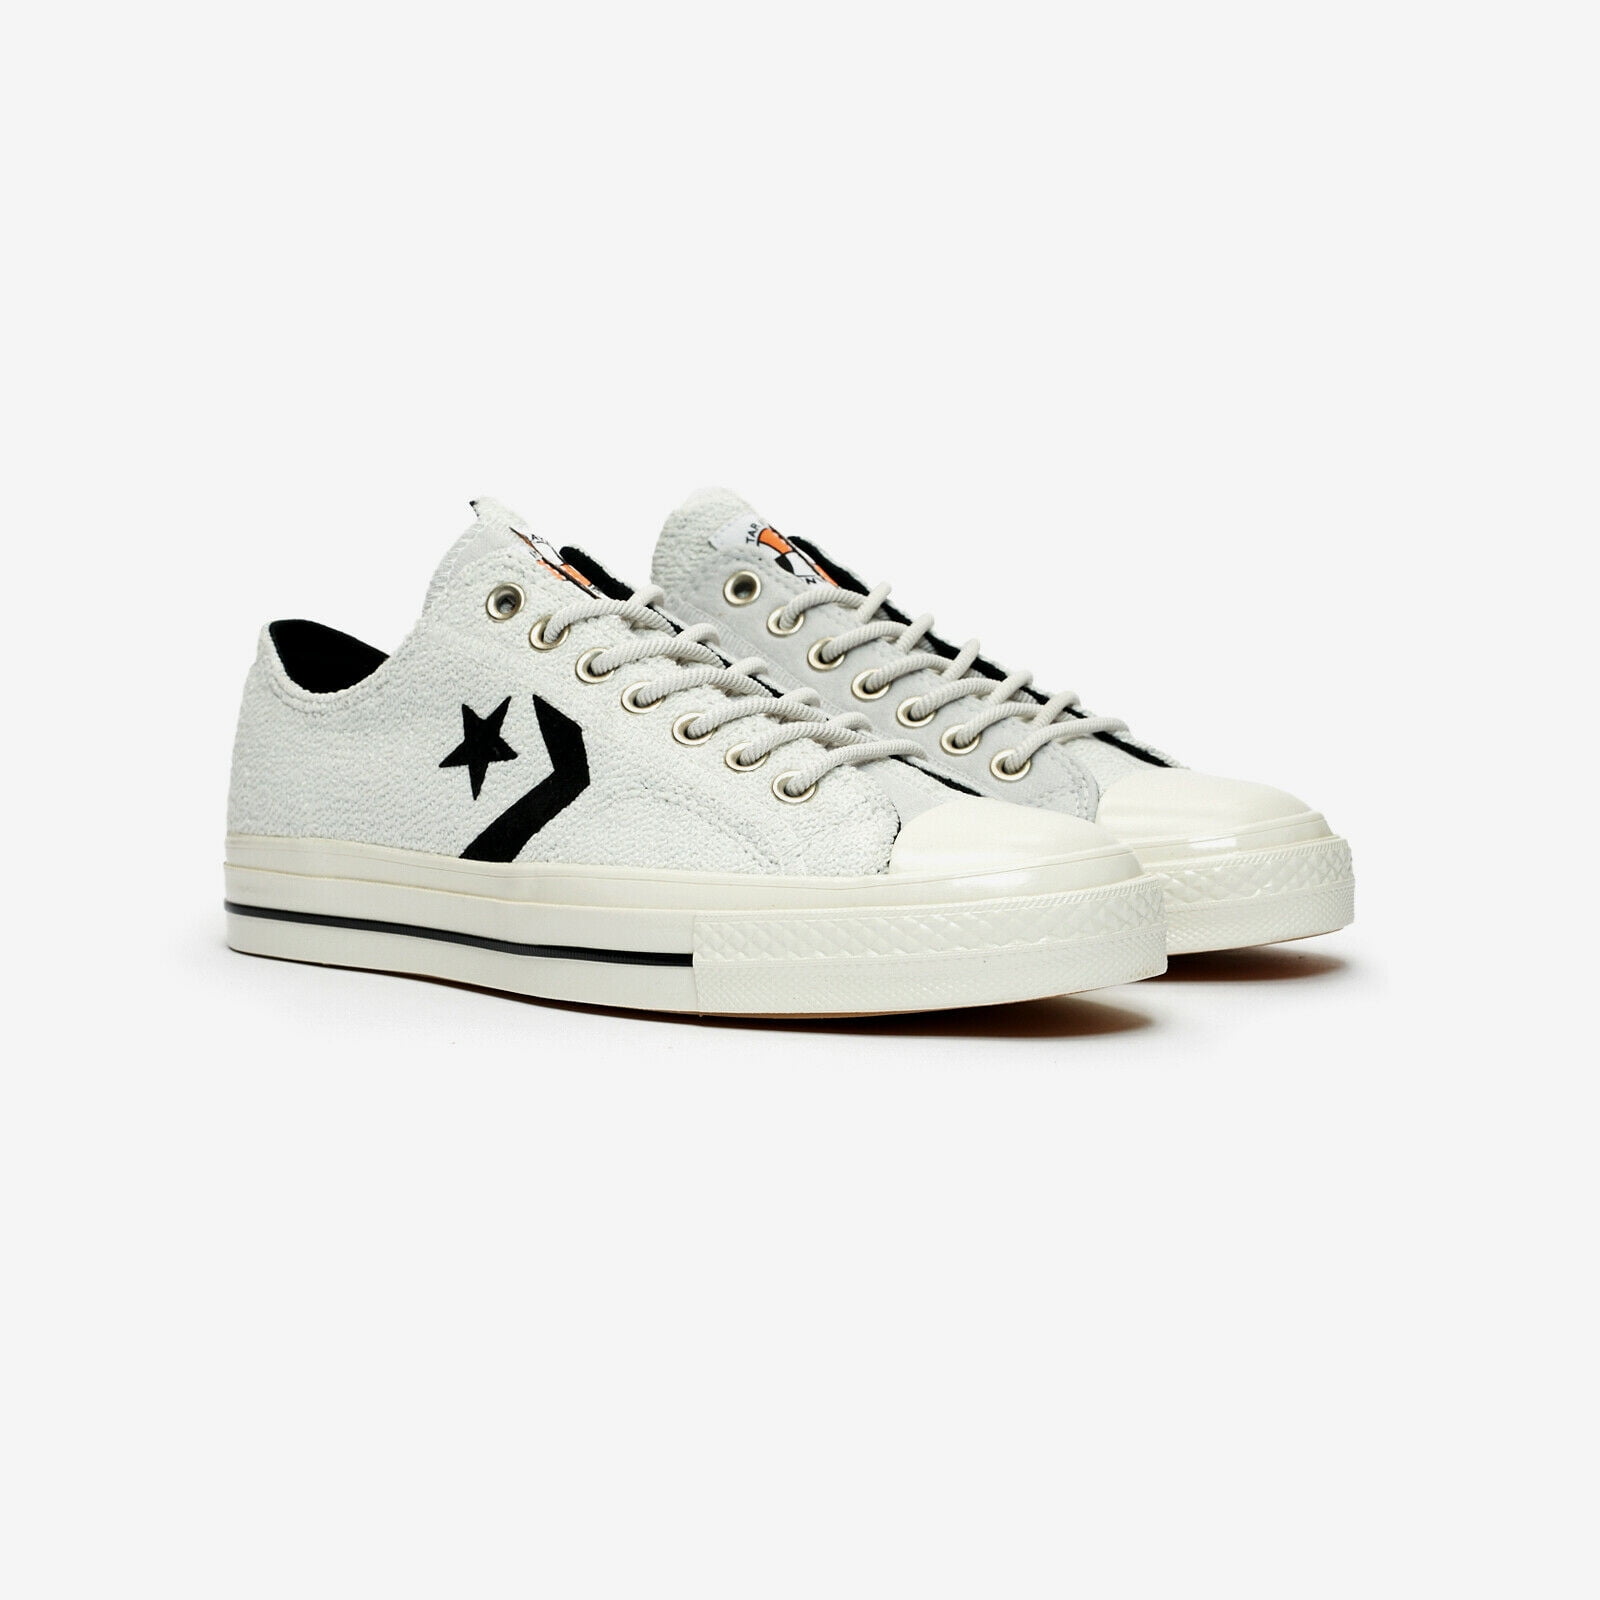 Converse Star Player Ox Reverse Terry Unisex White Sneakers Shoes HS5 (7) - Walmart.com